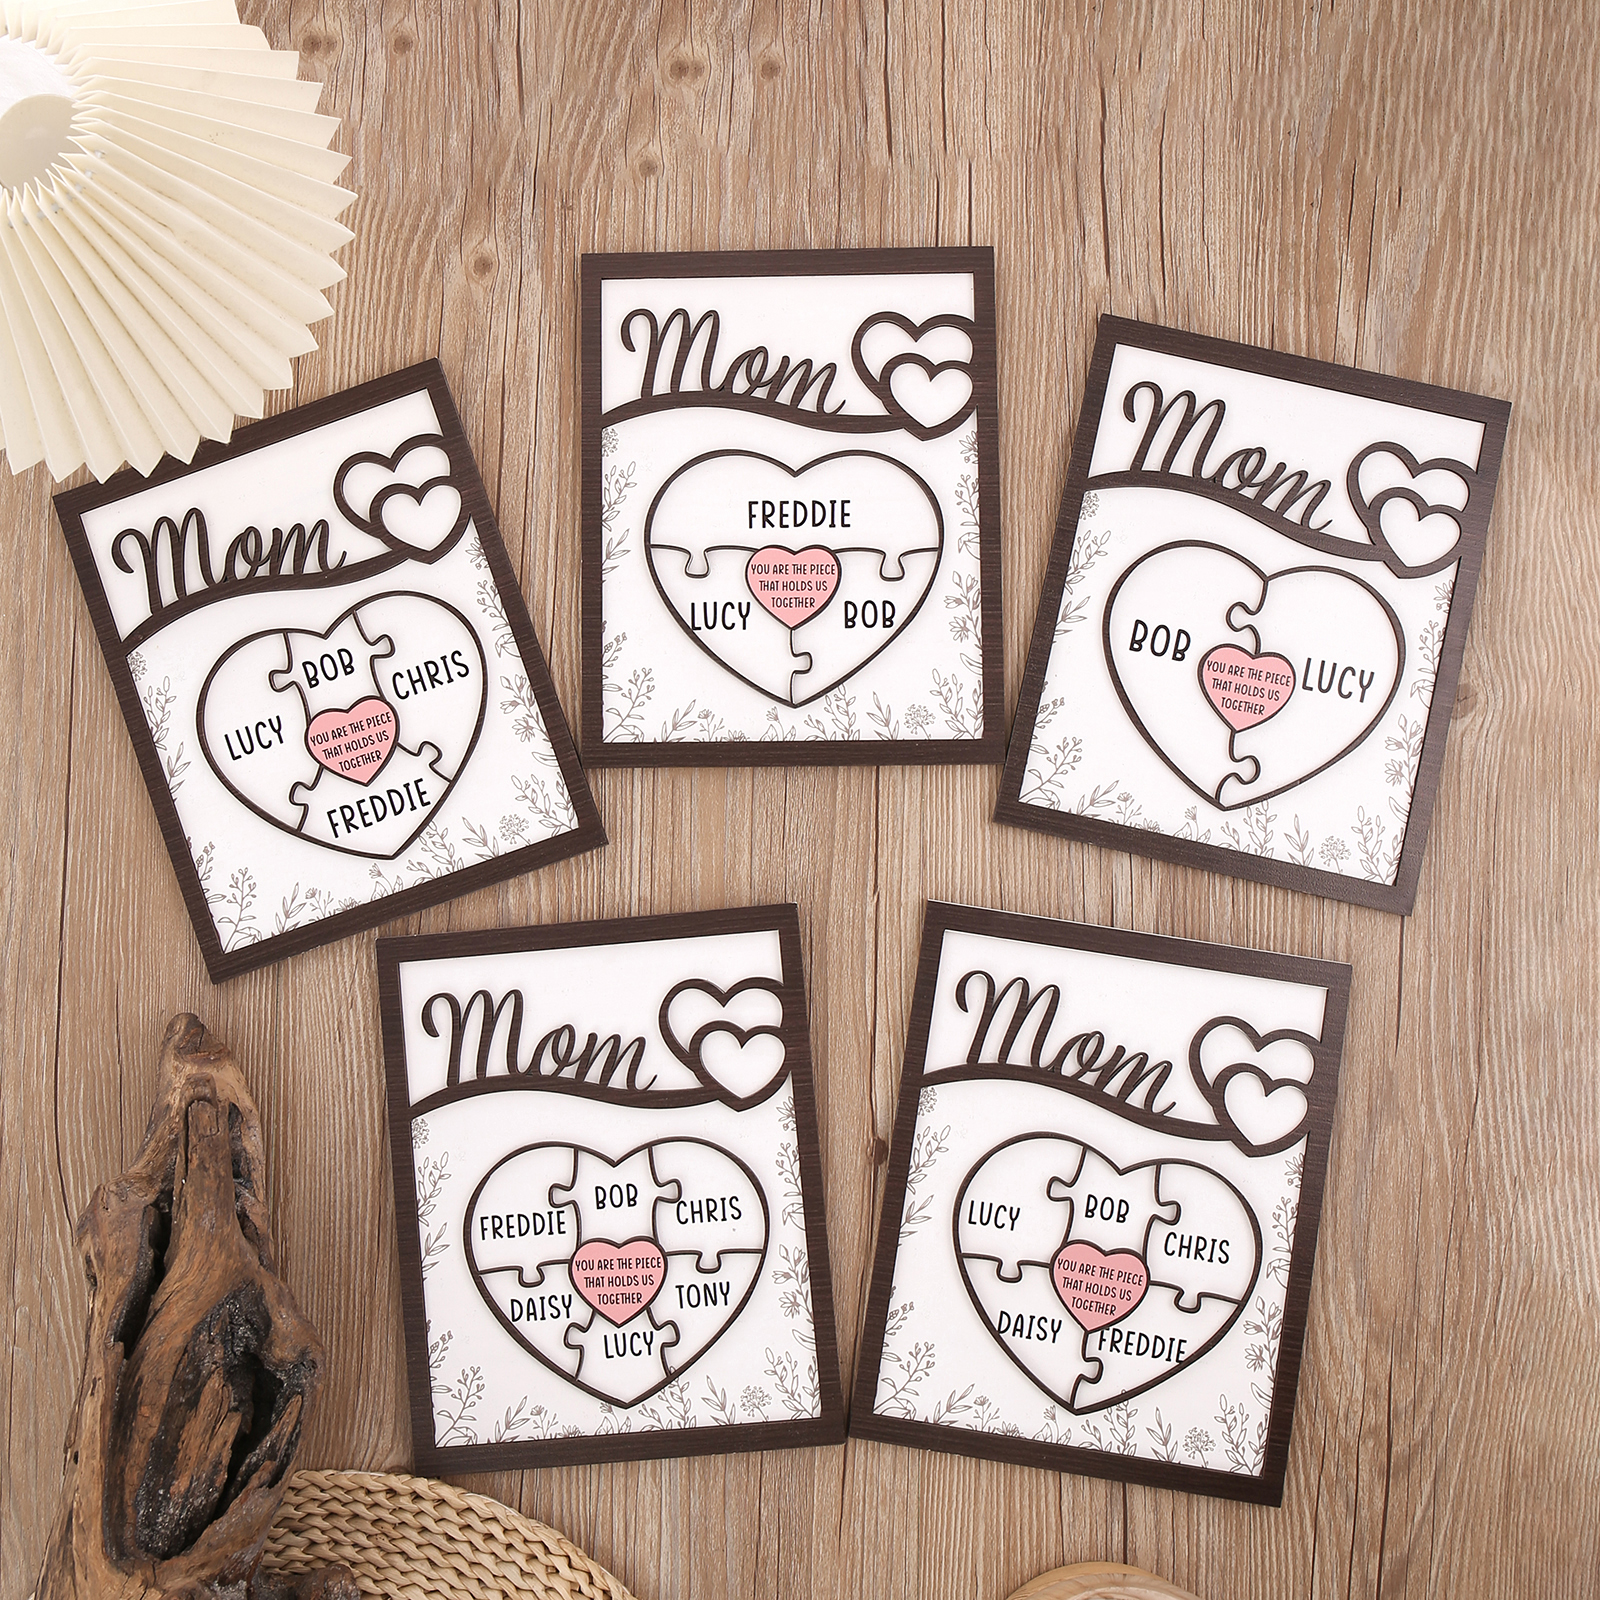 6 Names - Personalized Home Frame Wooden Ornaments Cute Bear Style Ornaments for Mom